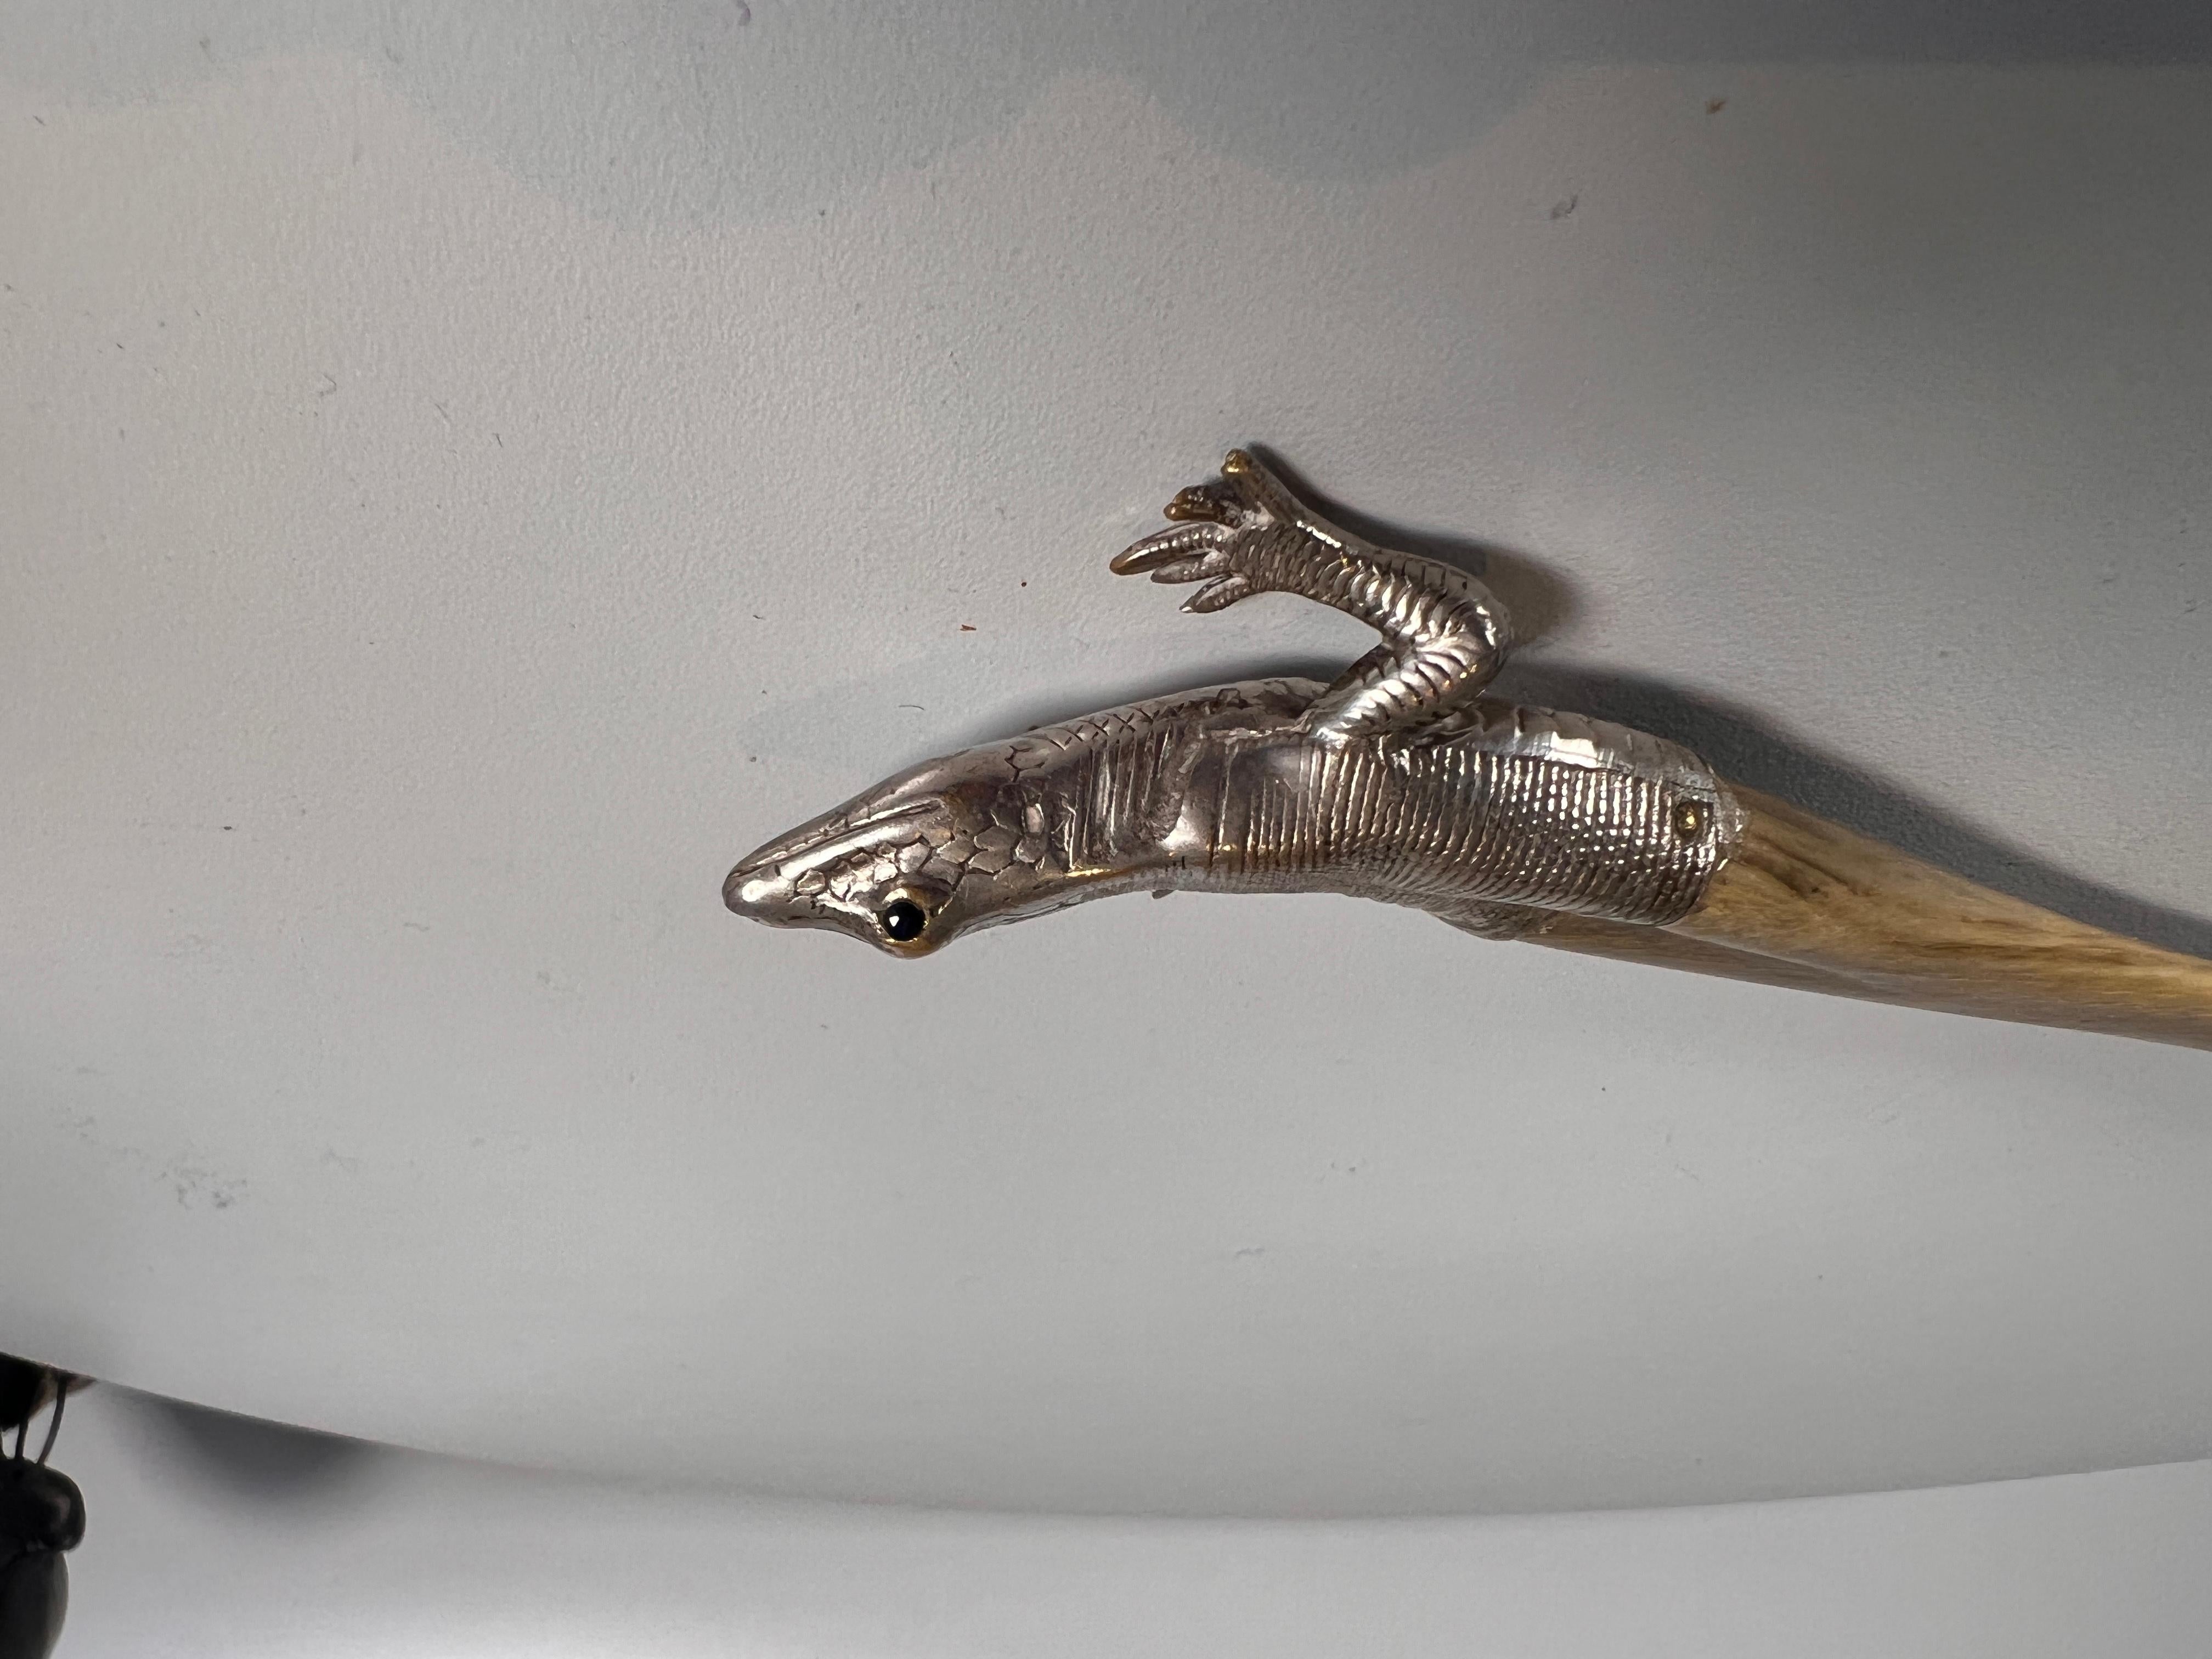 A wonderful quality Austro Hungarian letter opener in the form of a lizard - the realistically modelled lizard has inset glass eyes, the quality is superb and gives the lizard a very tactile and realistic feel.